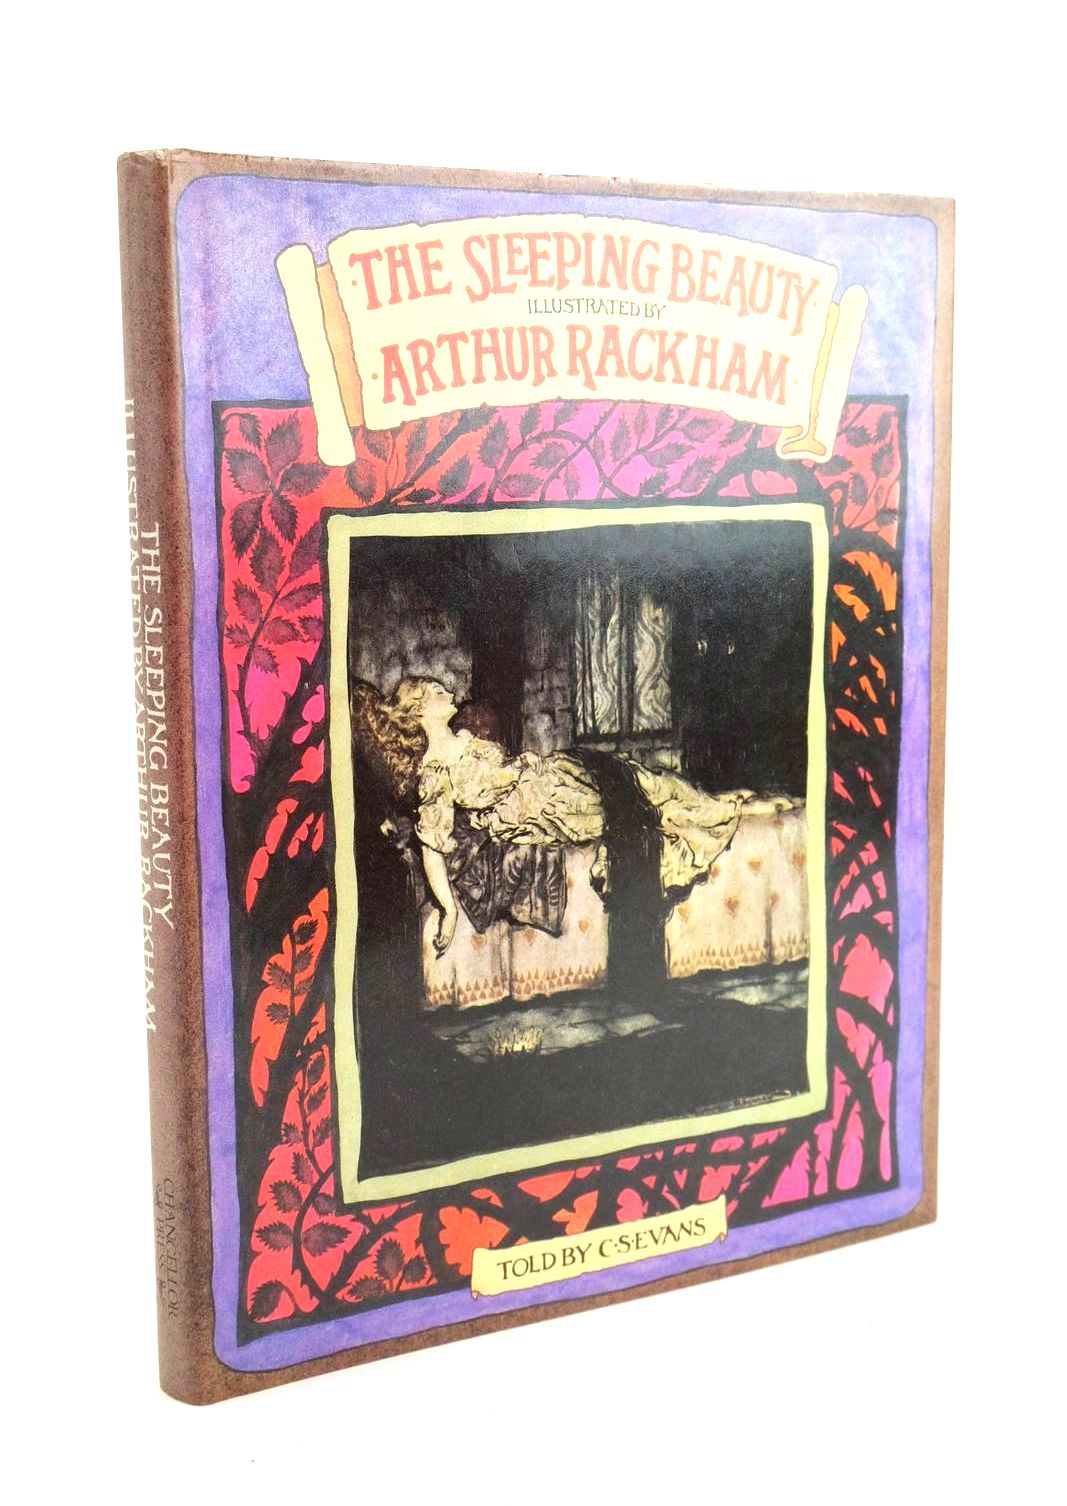 Photo of THE SLEEPING BEAUTY written by Evans, C.S. illustrated by Rackham, Arthur published by Chancellor Press (STOCK CODE: 1323394)  for sale by Stella & Rose's Books